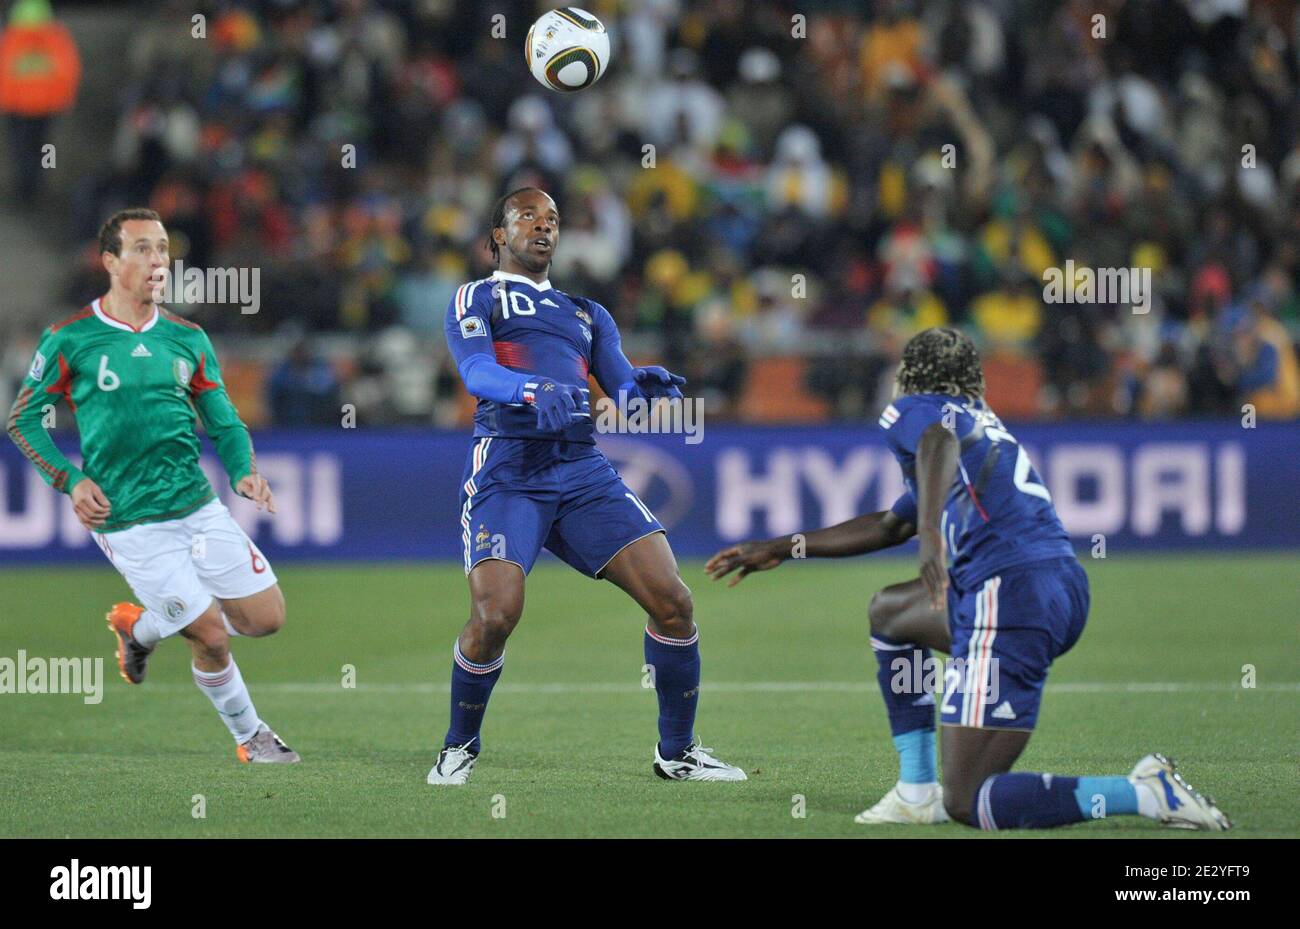 France's competes during the 2010 FIFA World Cup soccer match, Group A, France vs Mexico at Peter Mokaba Stadium, in Polokwane, South Africa on June 17, 2010. Mexico won 2-0. Photo by Christophe Guibbaud/Cameleon/ABACAPRESS.COM Stock Photo